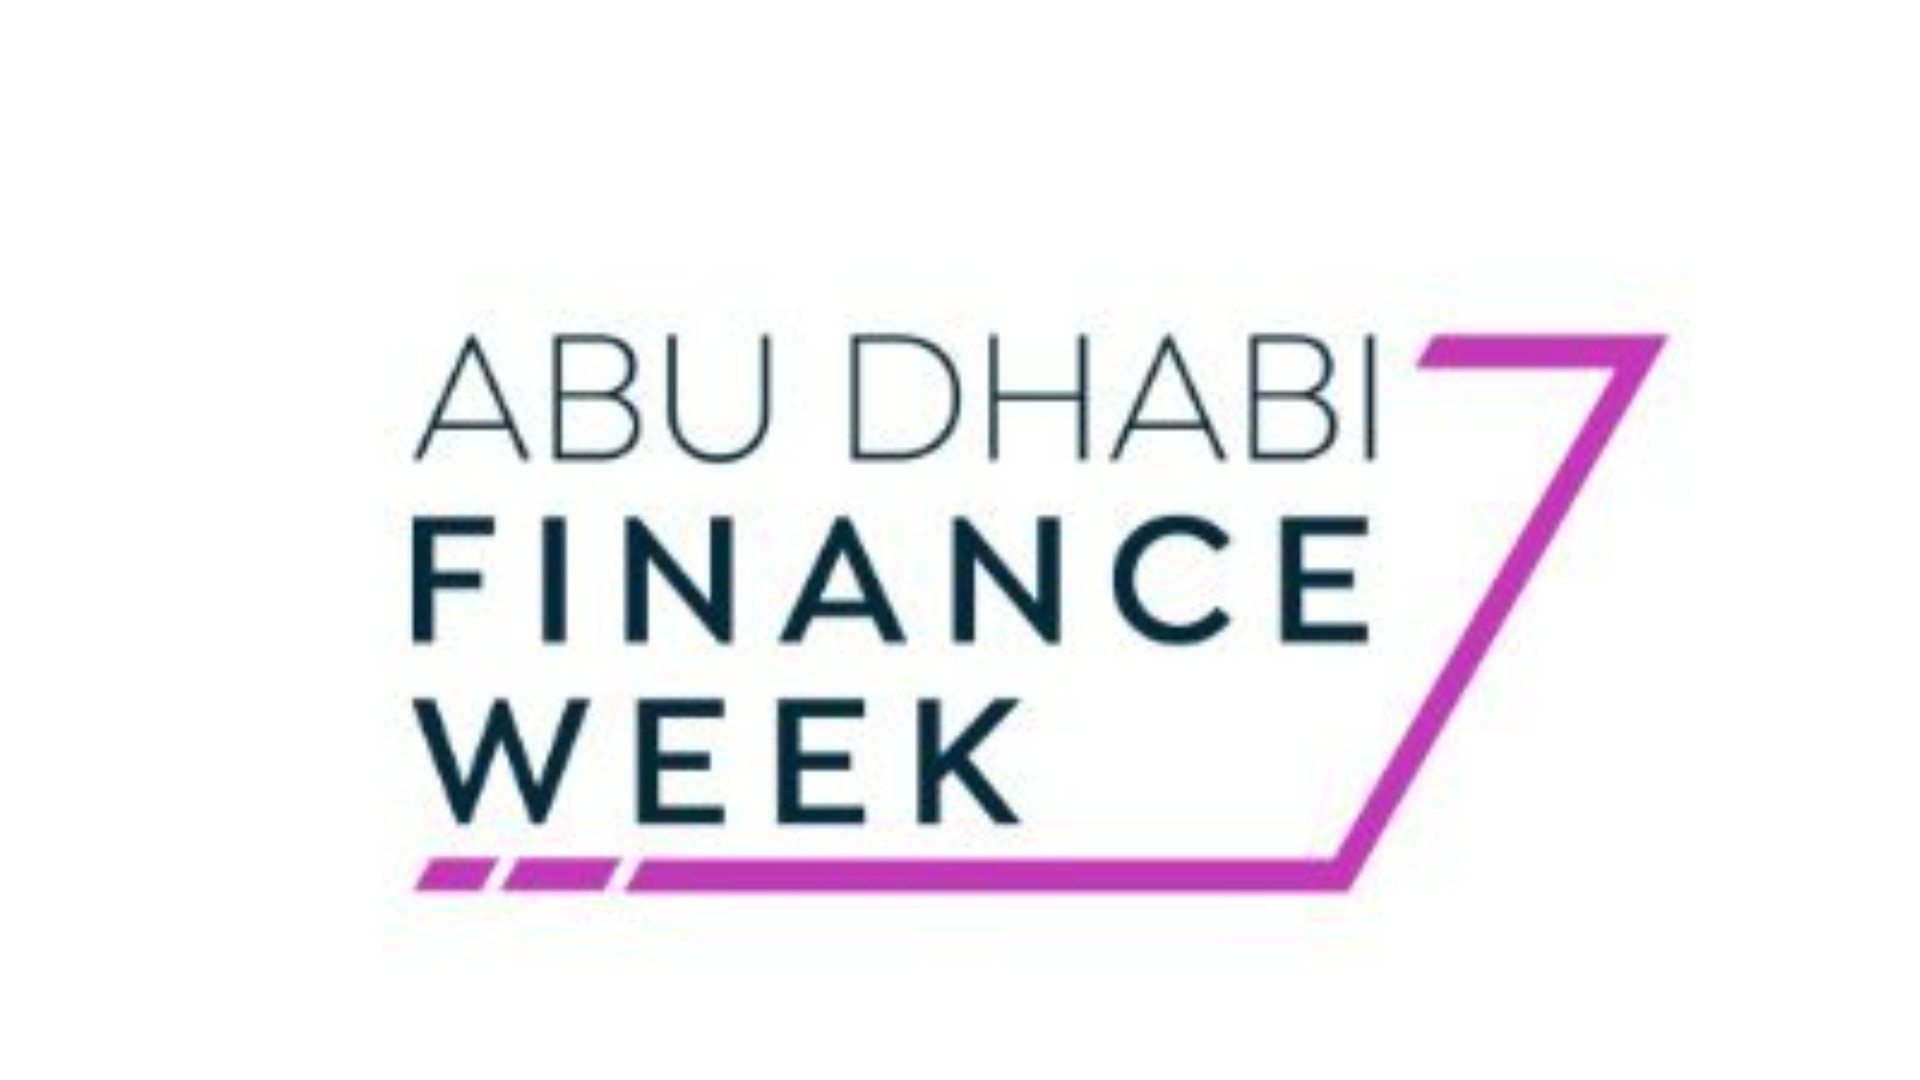 OKX to Be A Support Partner of Abu Dhabi Finance Week